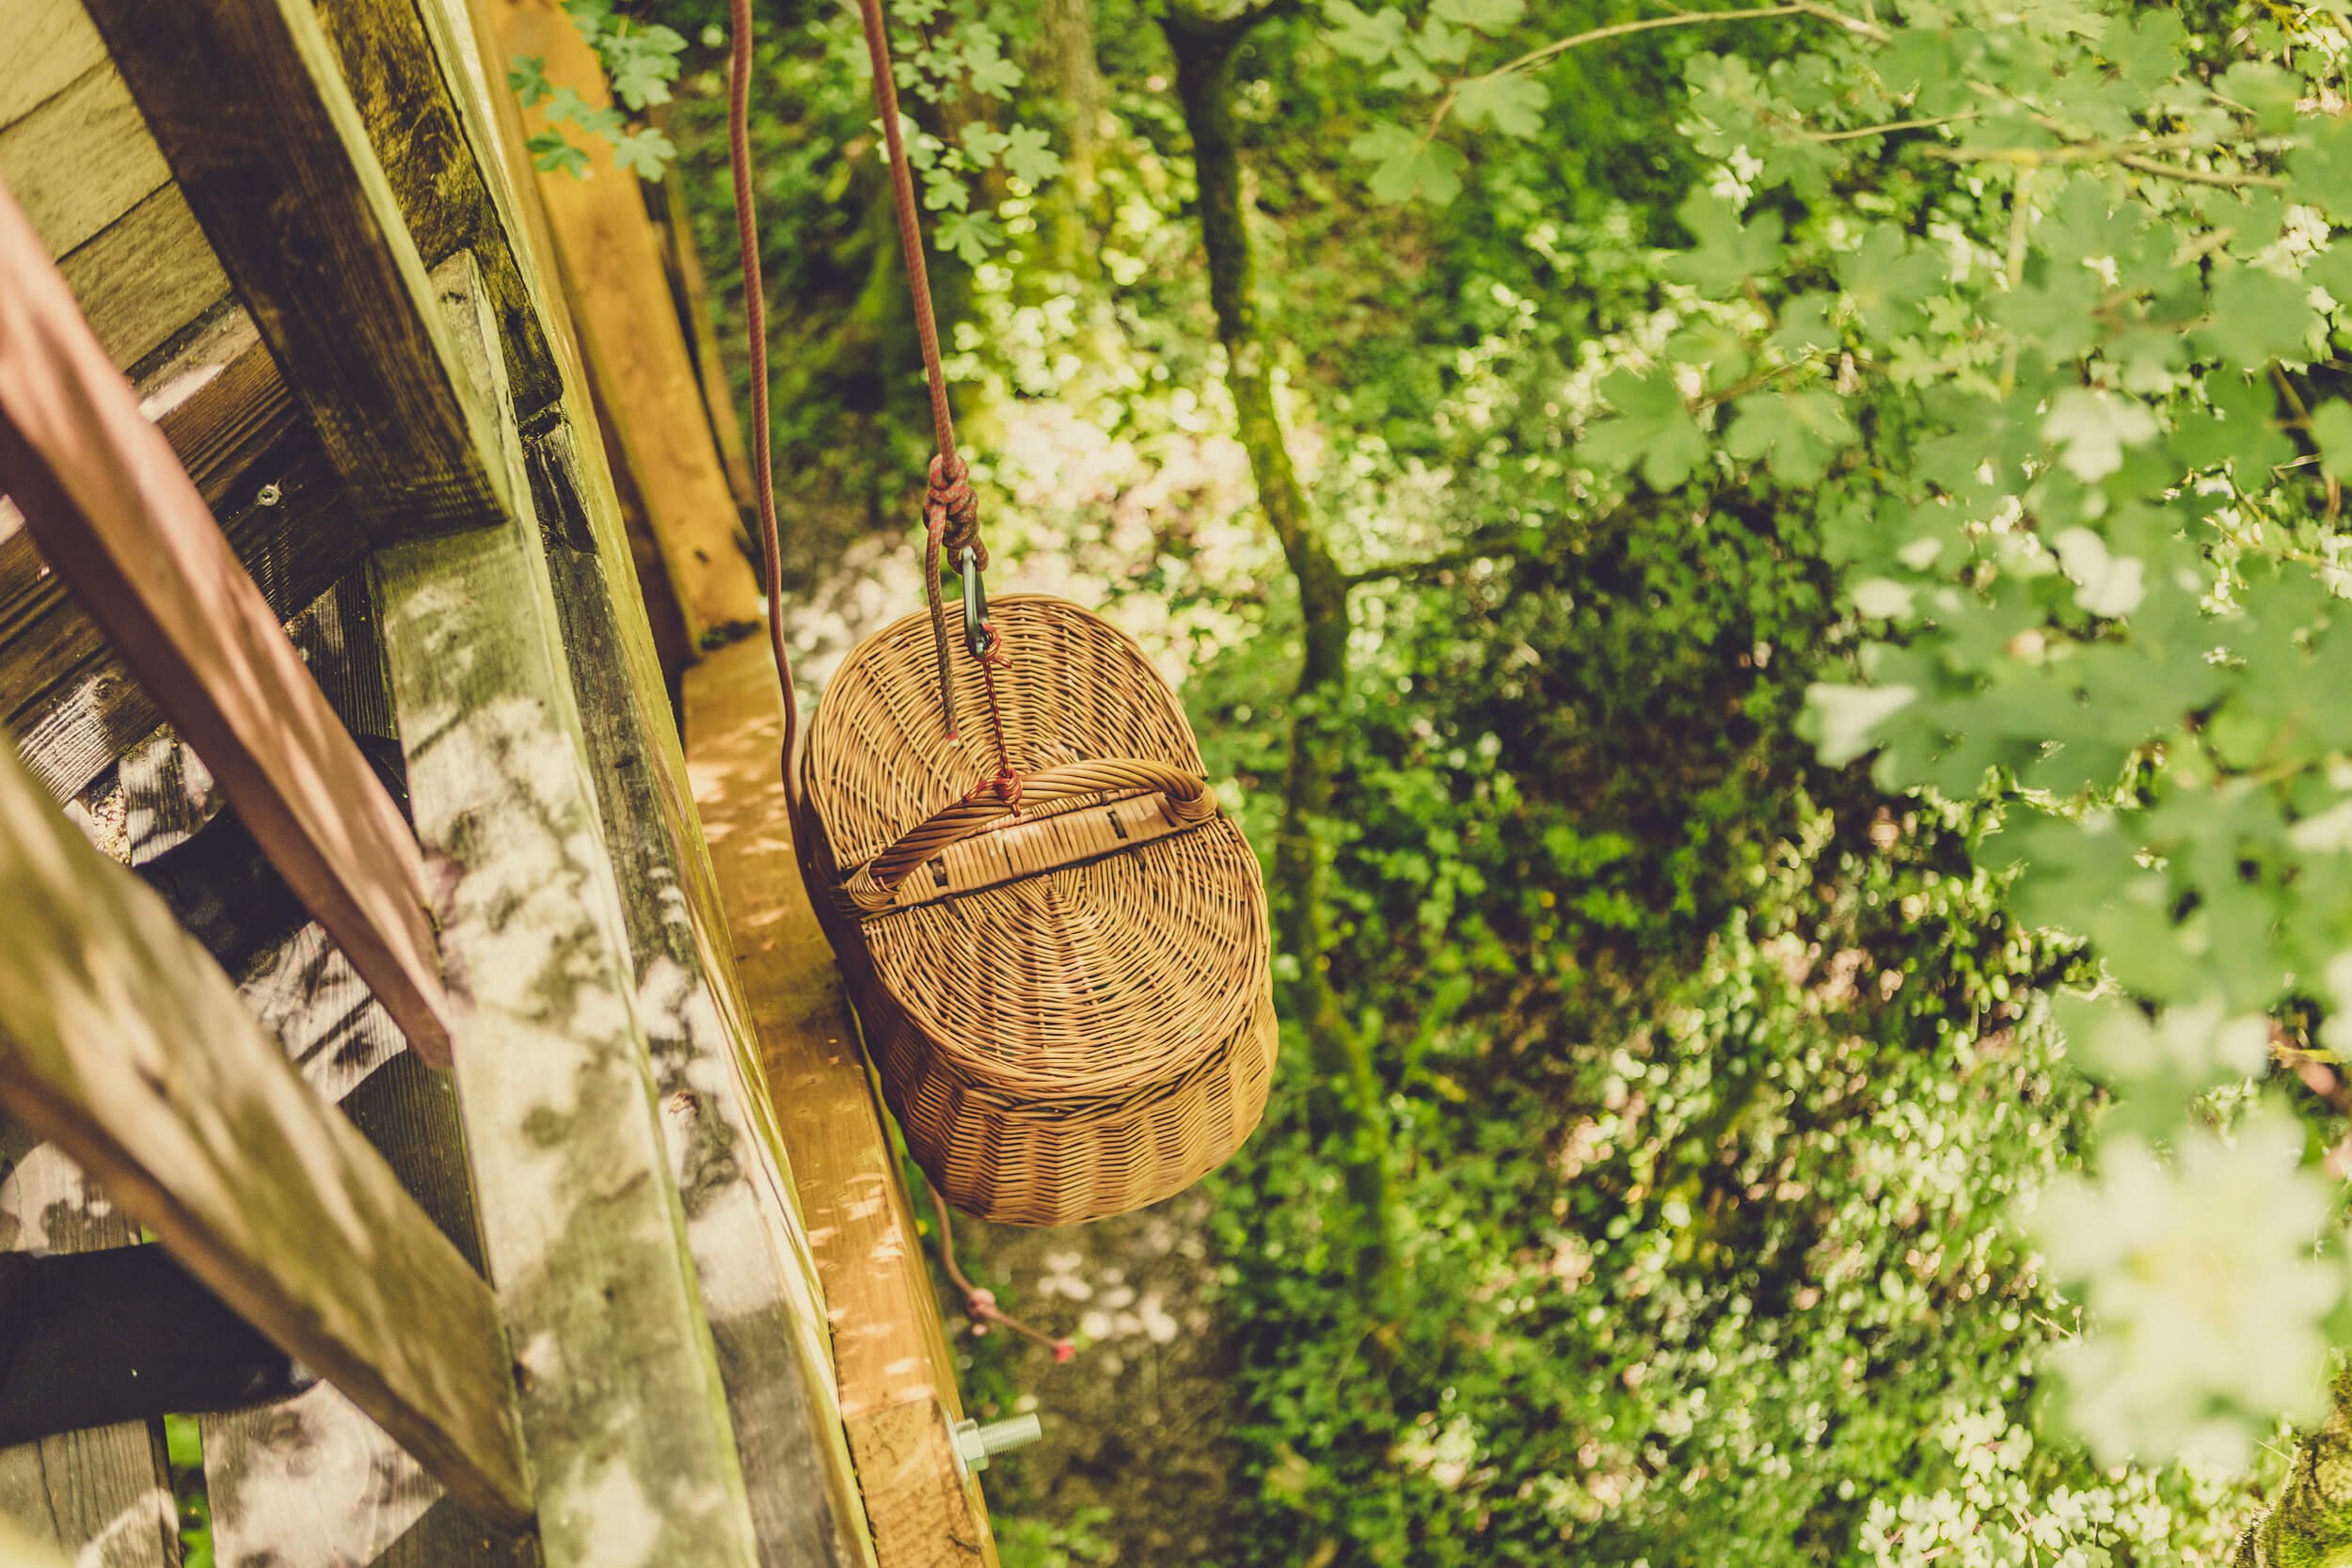 Escape to the forest- a look inside Basoa Suites' treehouses by MuruStudios advertising photographers in Madrid Barcelona Pamplona Spain 25.jpg